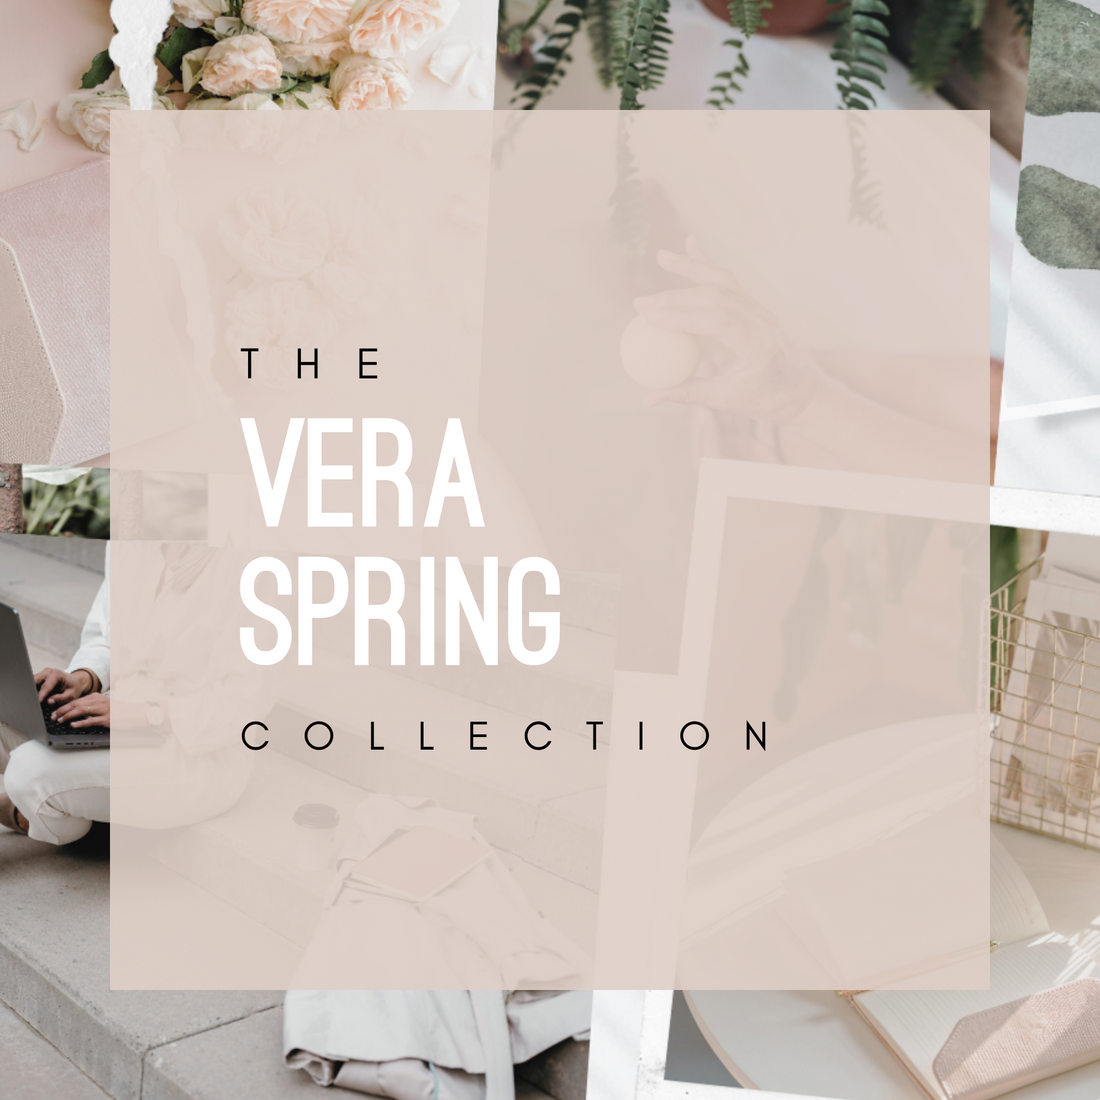 Introducing The Vera Spring Collection